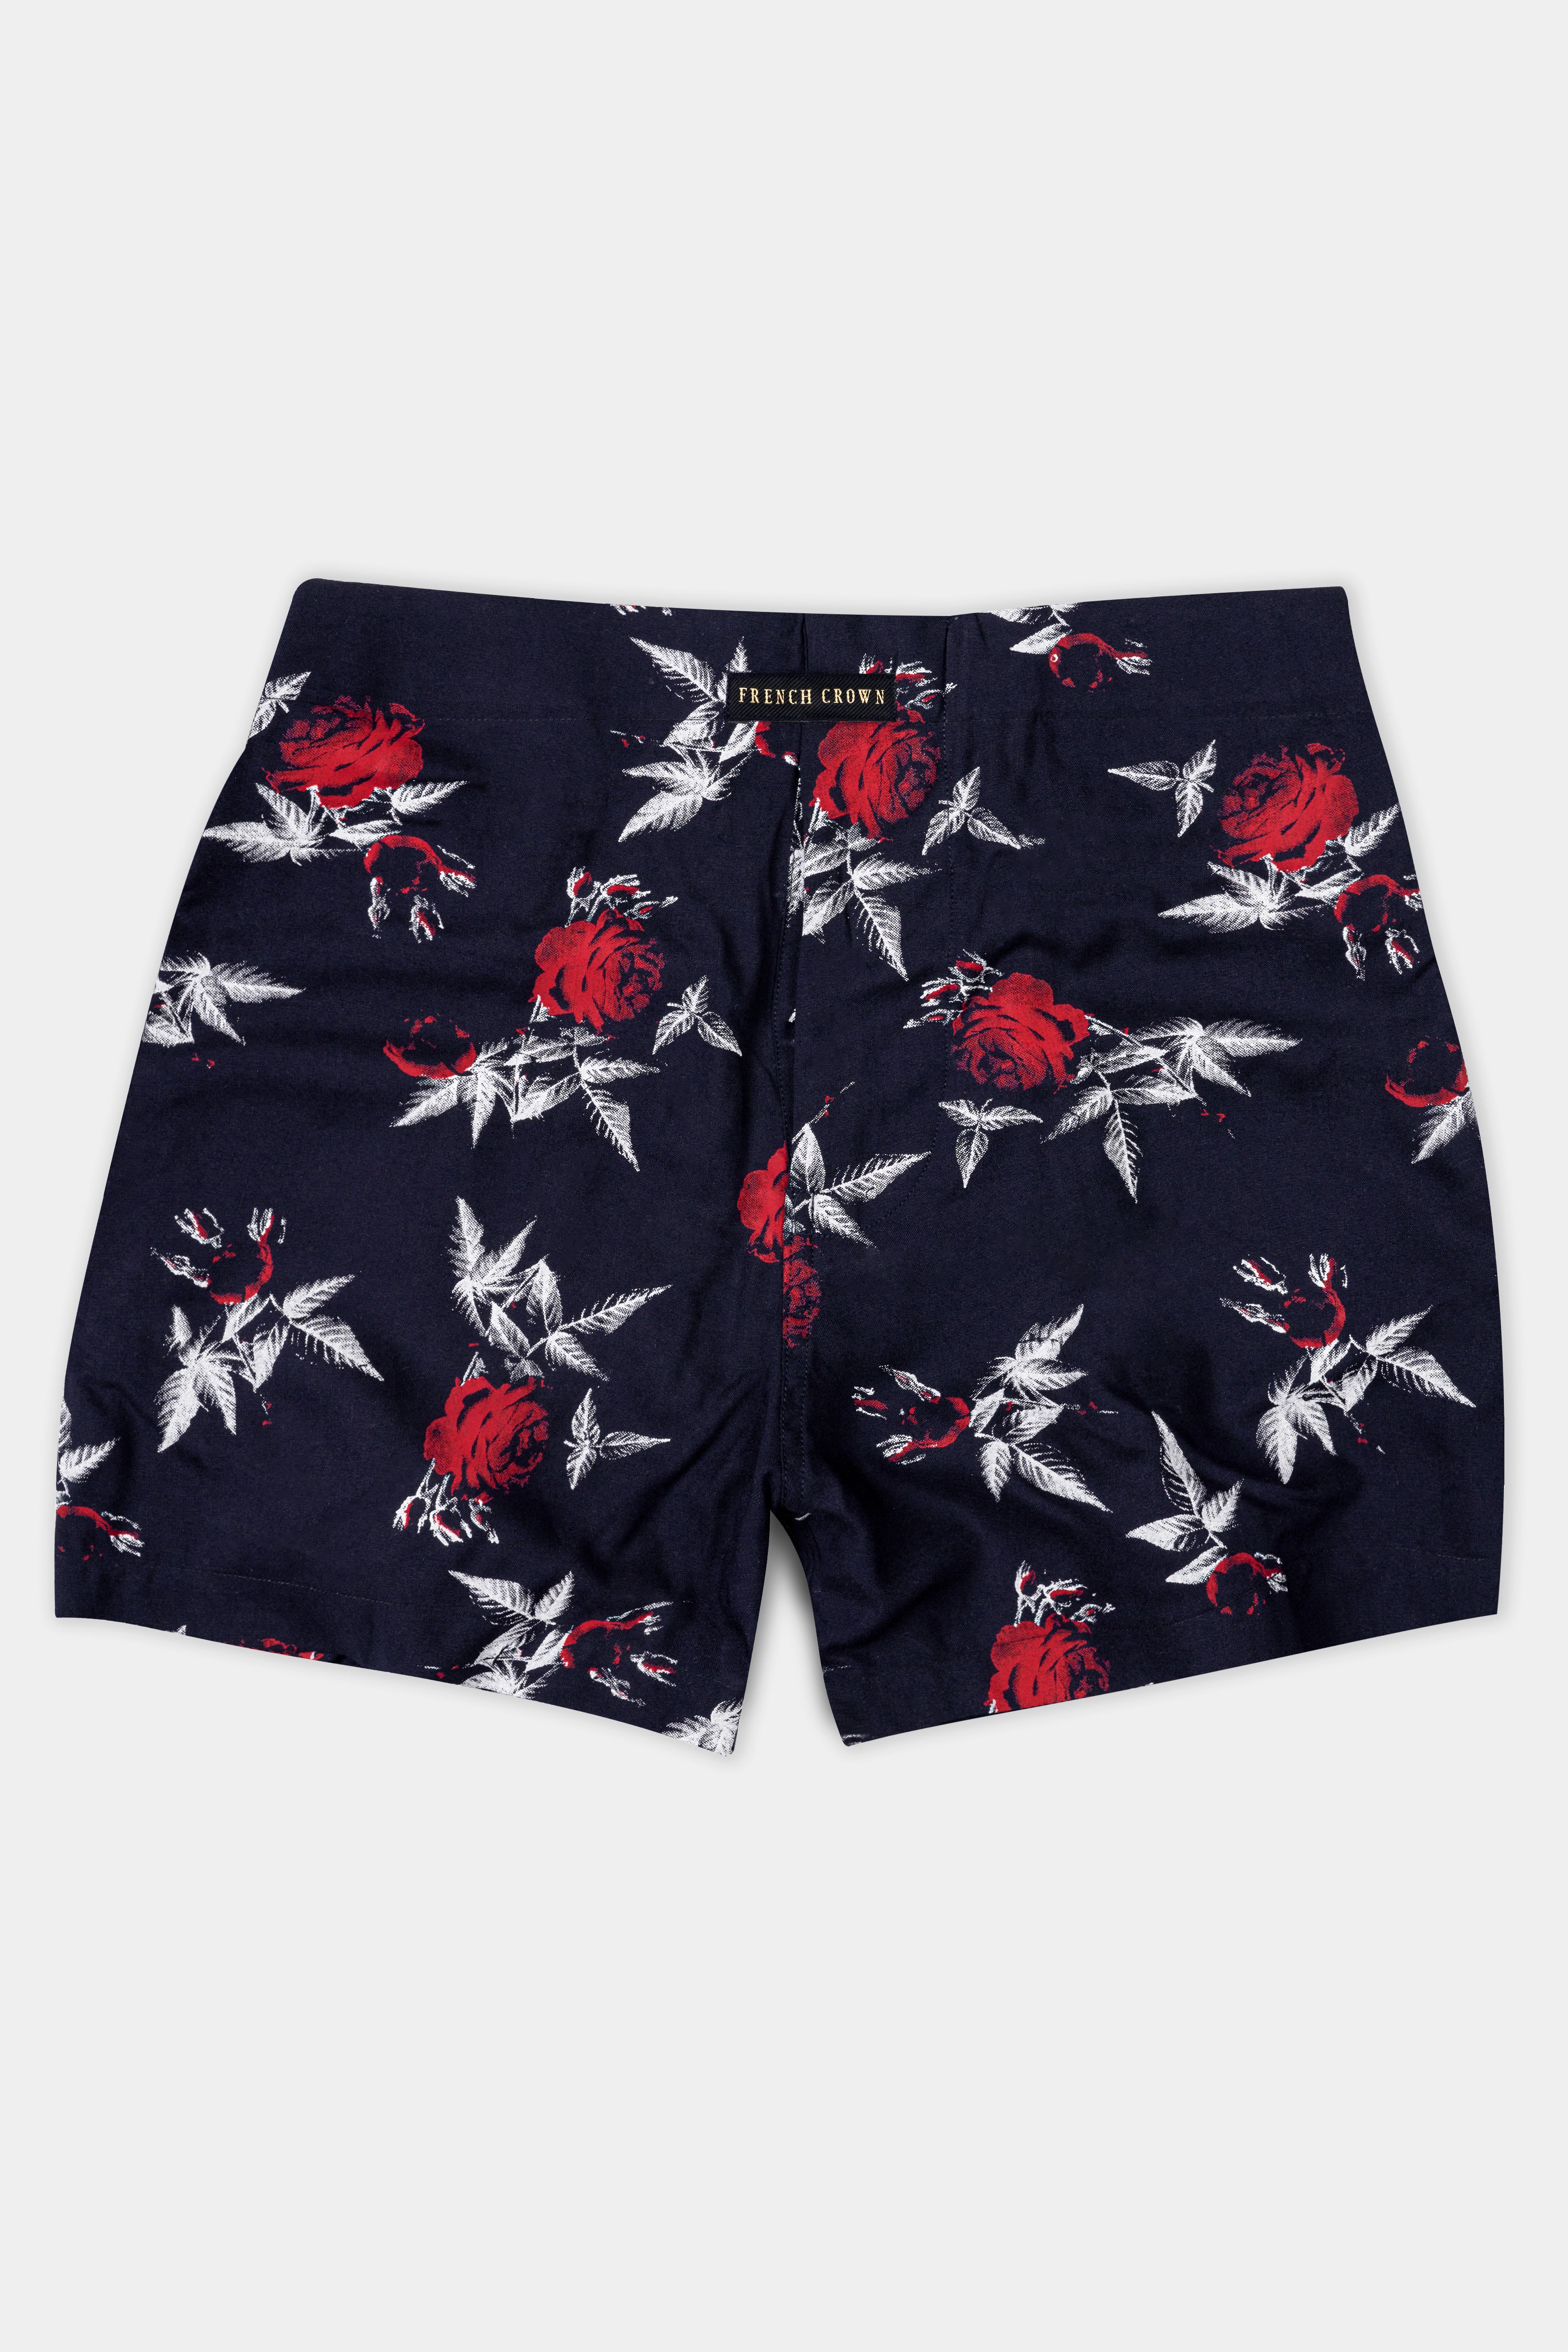 Haiti Navy Blue With Stiletto Red Printed Premium Tencel Boxer BX529-28, BX529-30, BX529-32, BX529-34, BX529-36, BX529-38, BX529-40, BX529-42, BX529-44